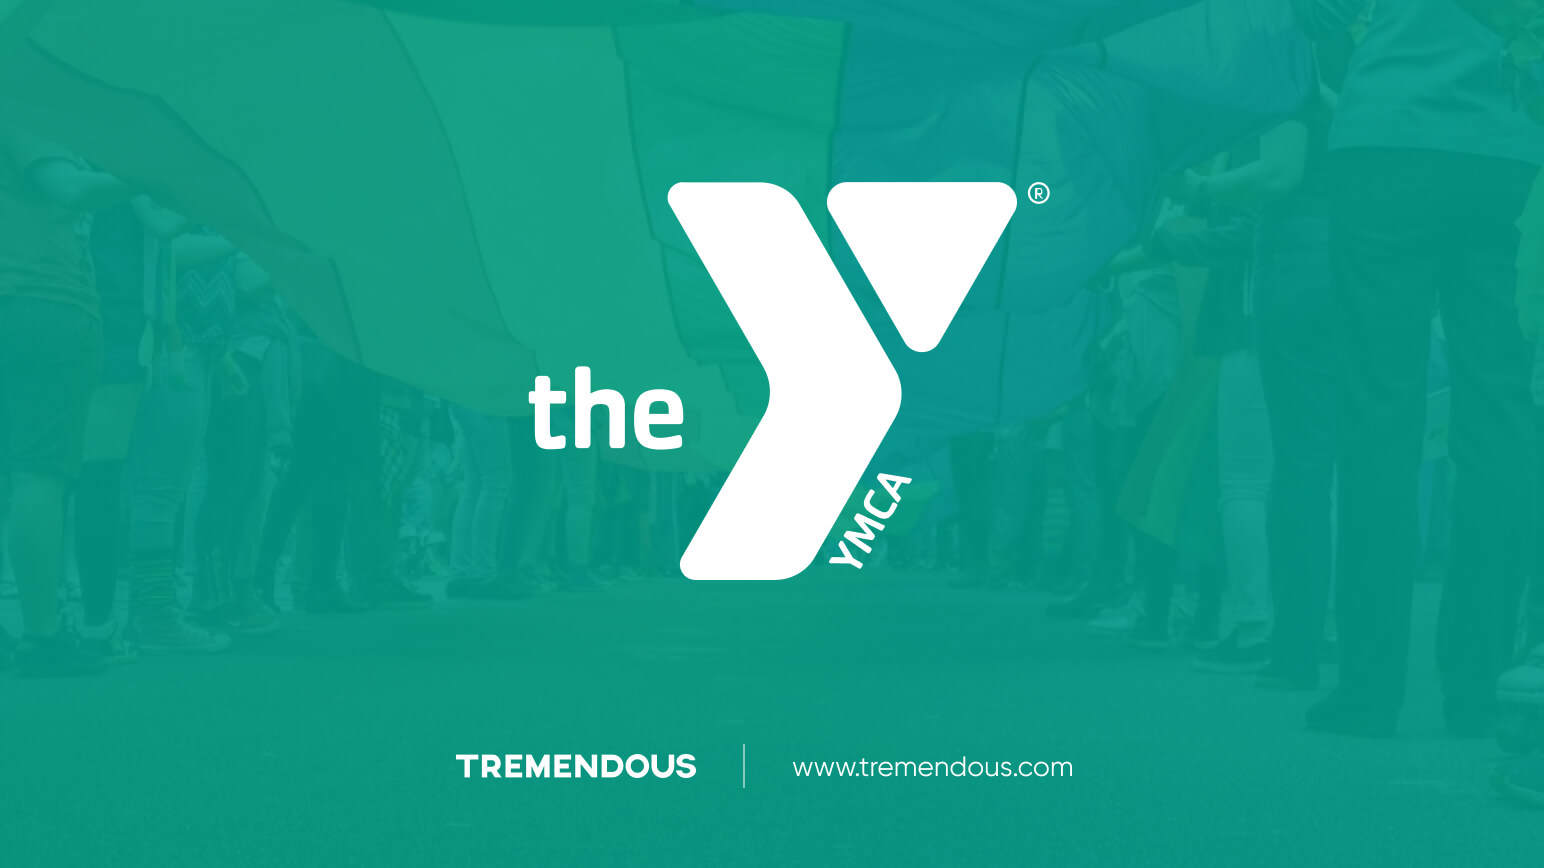 The YMCA logo on a green background.